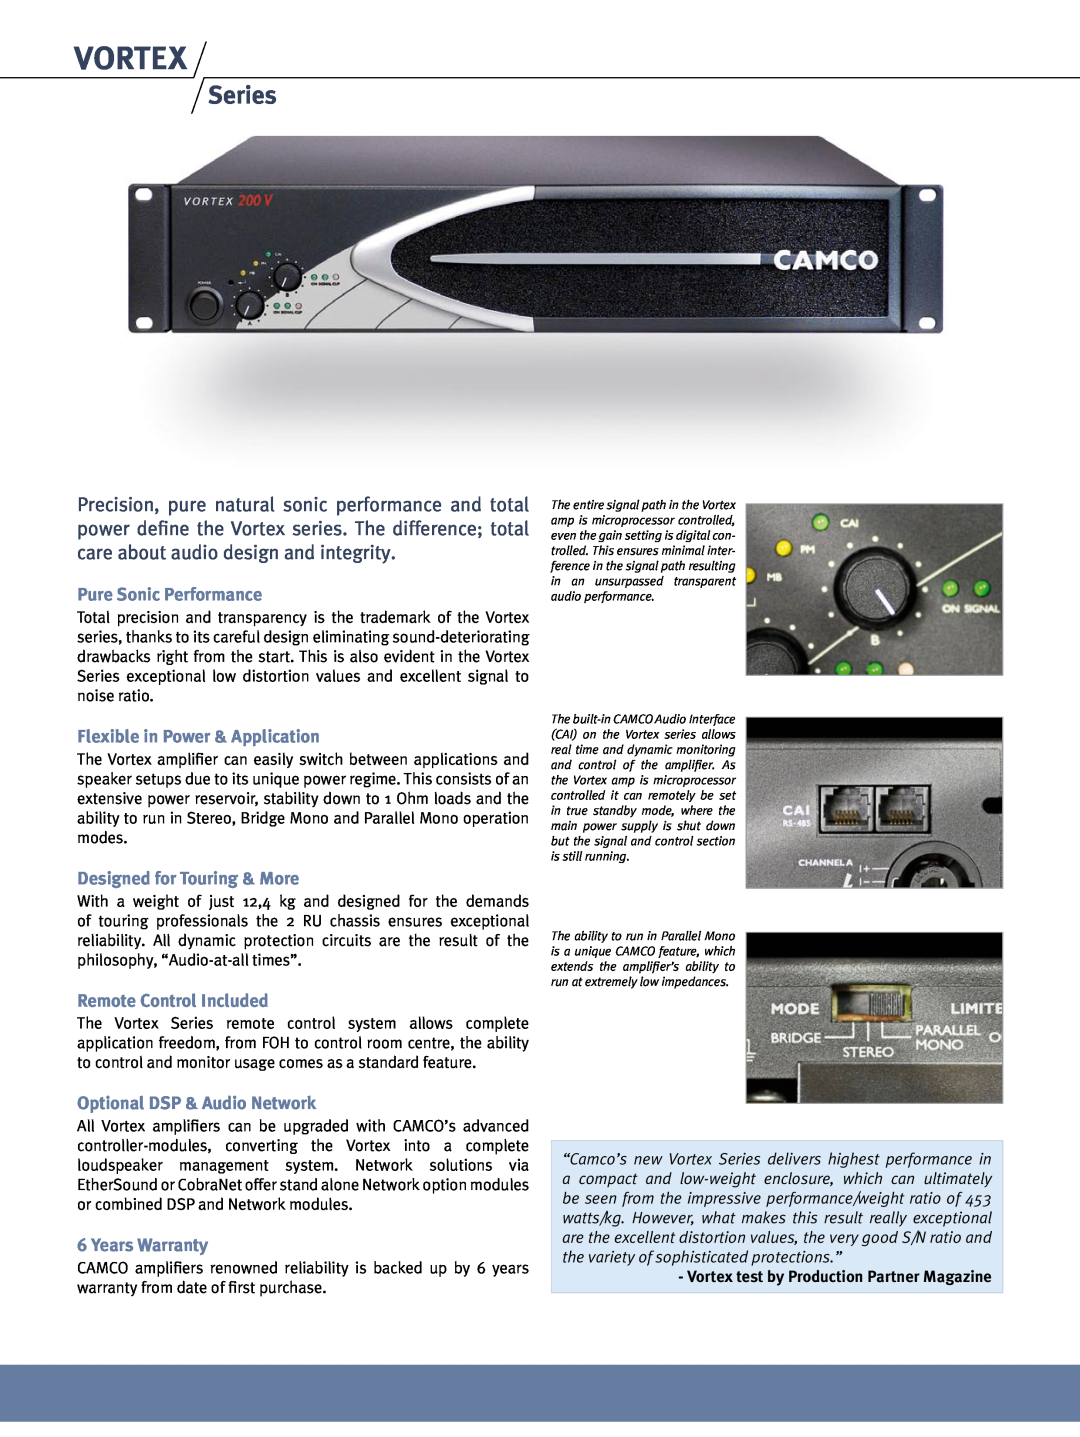 Camco Amplifier manual Vortex, Series, Pure Sonic Performance, Flexible in Power & Application, Designed for Touring & More 